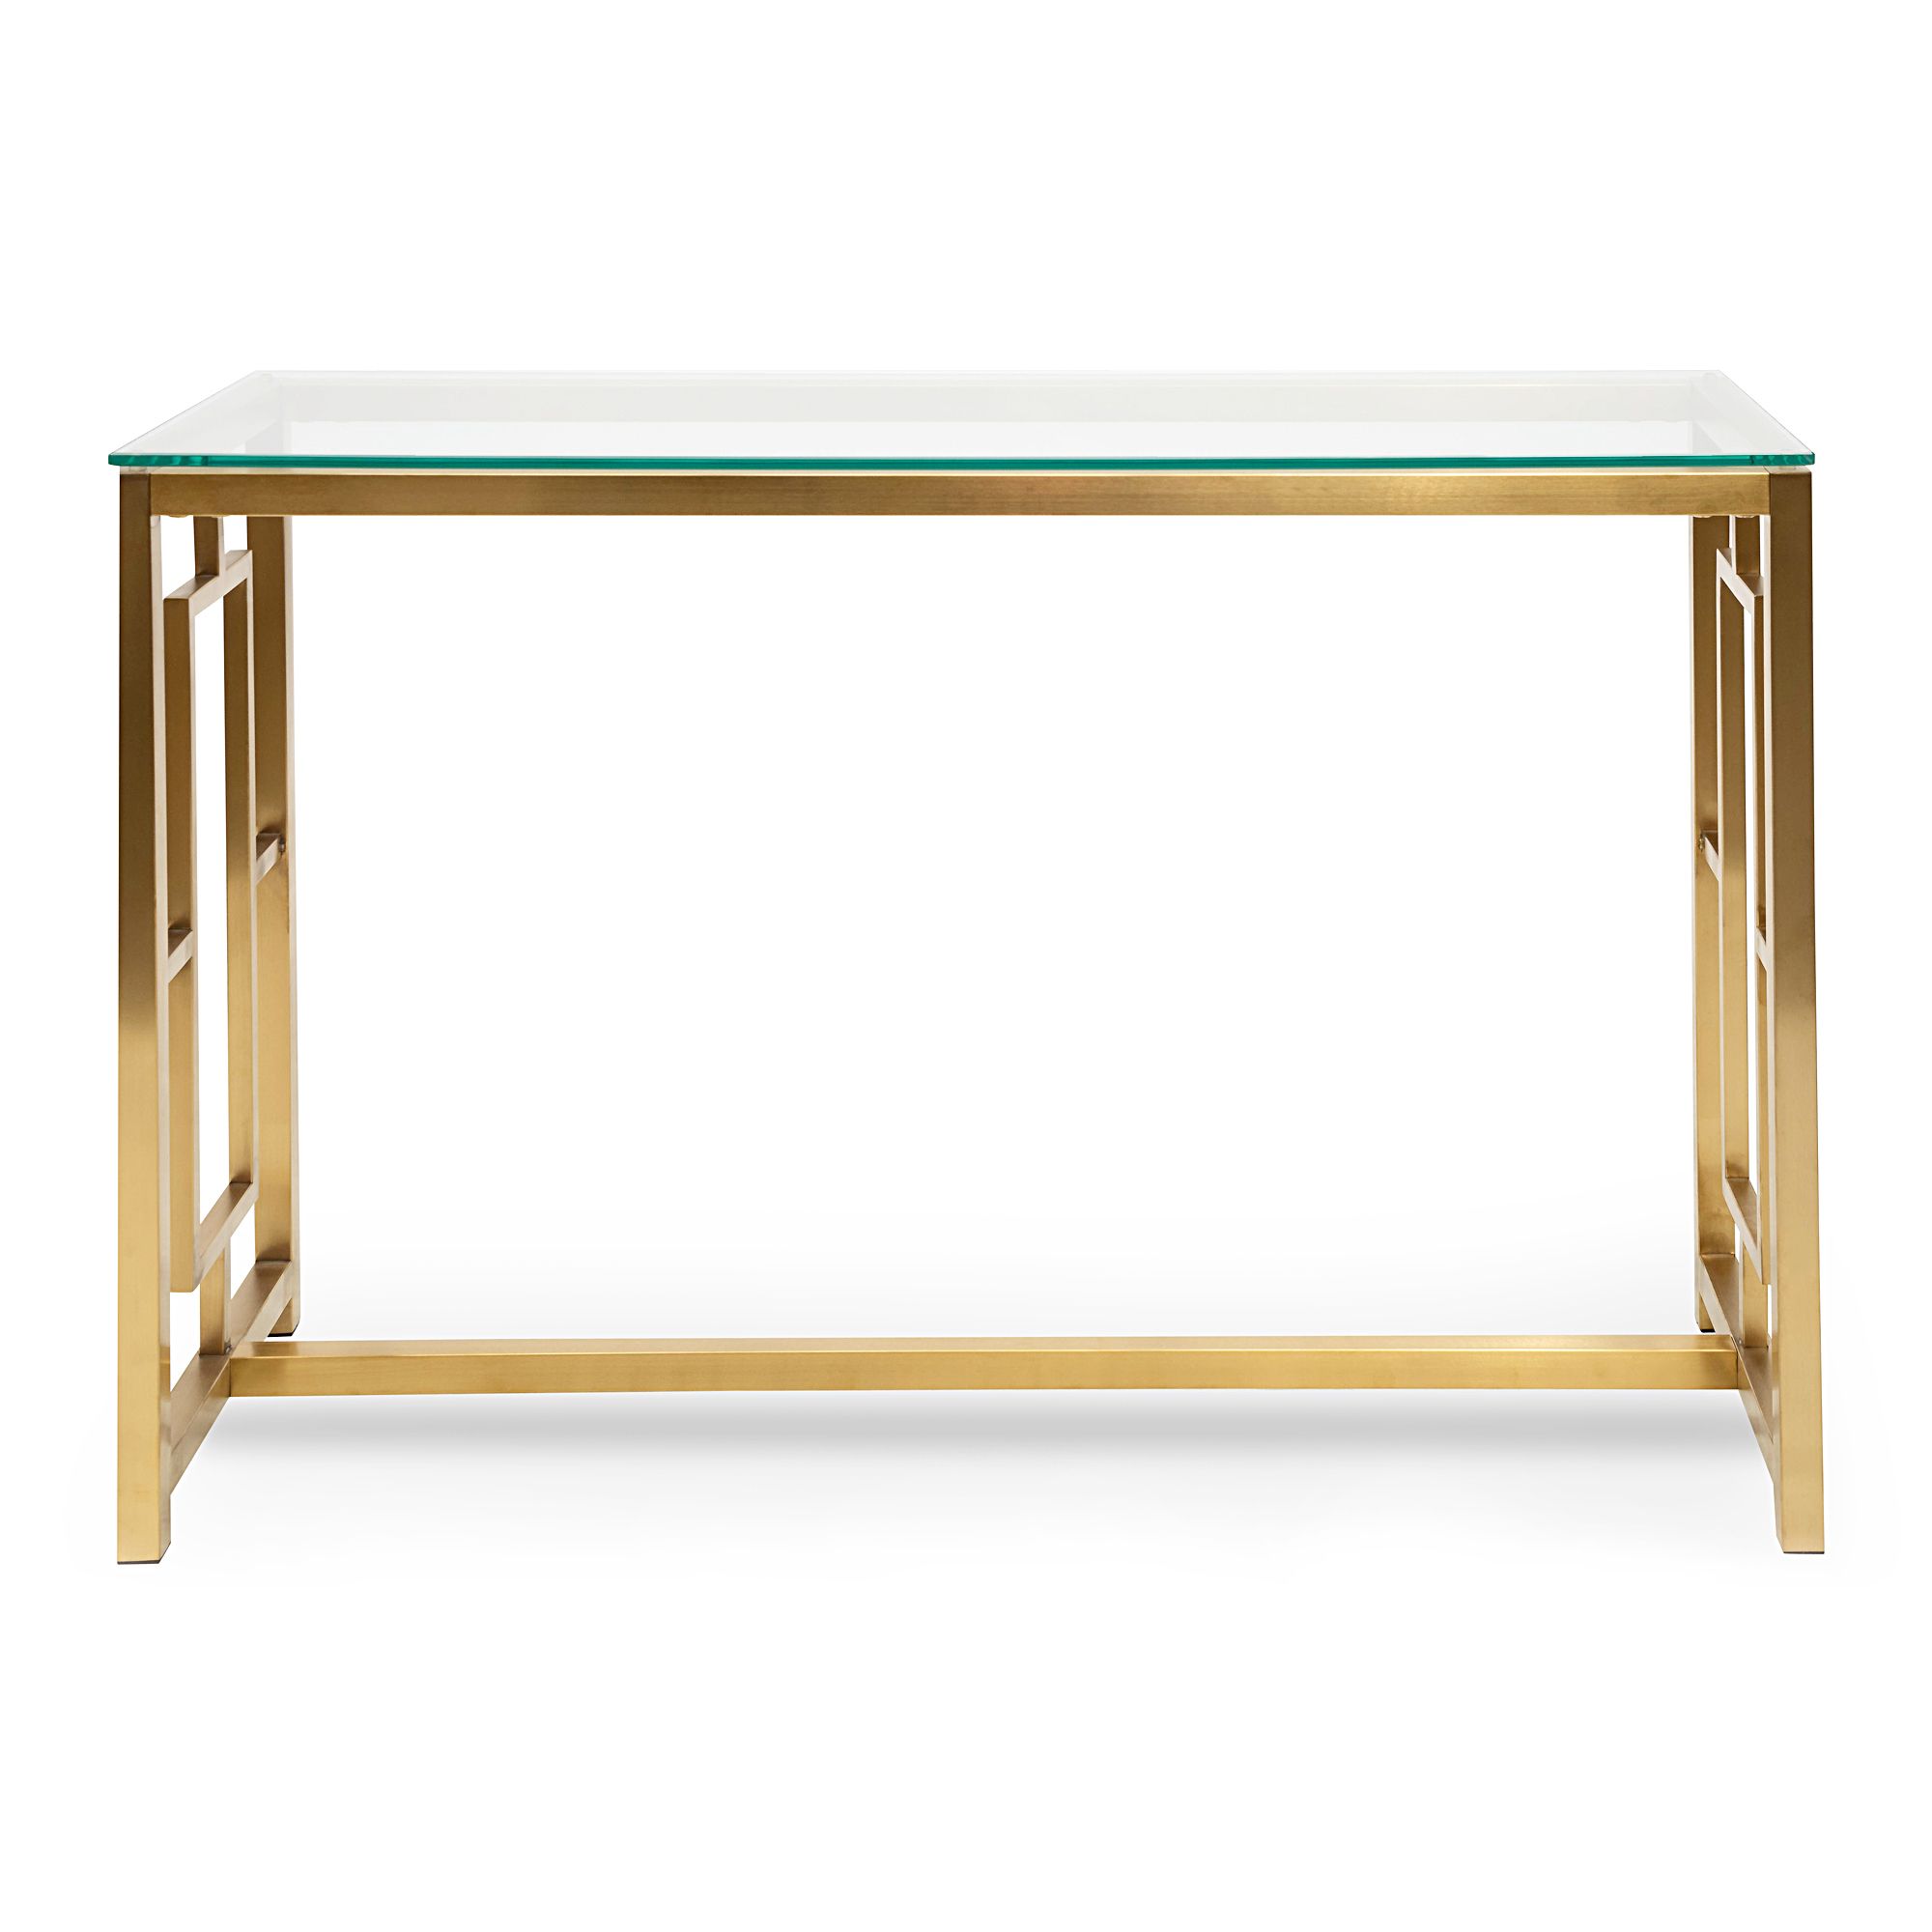 New Brushed Gold Lorenza Glass Top Console Table | Ebay For Glass And Gold Console Tables (Photo 5 of 20)